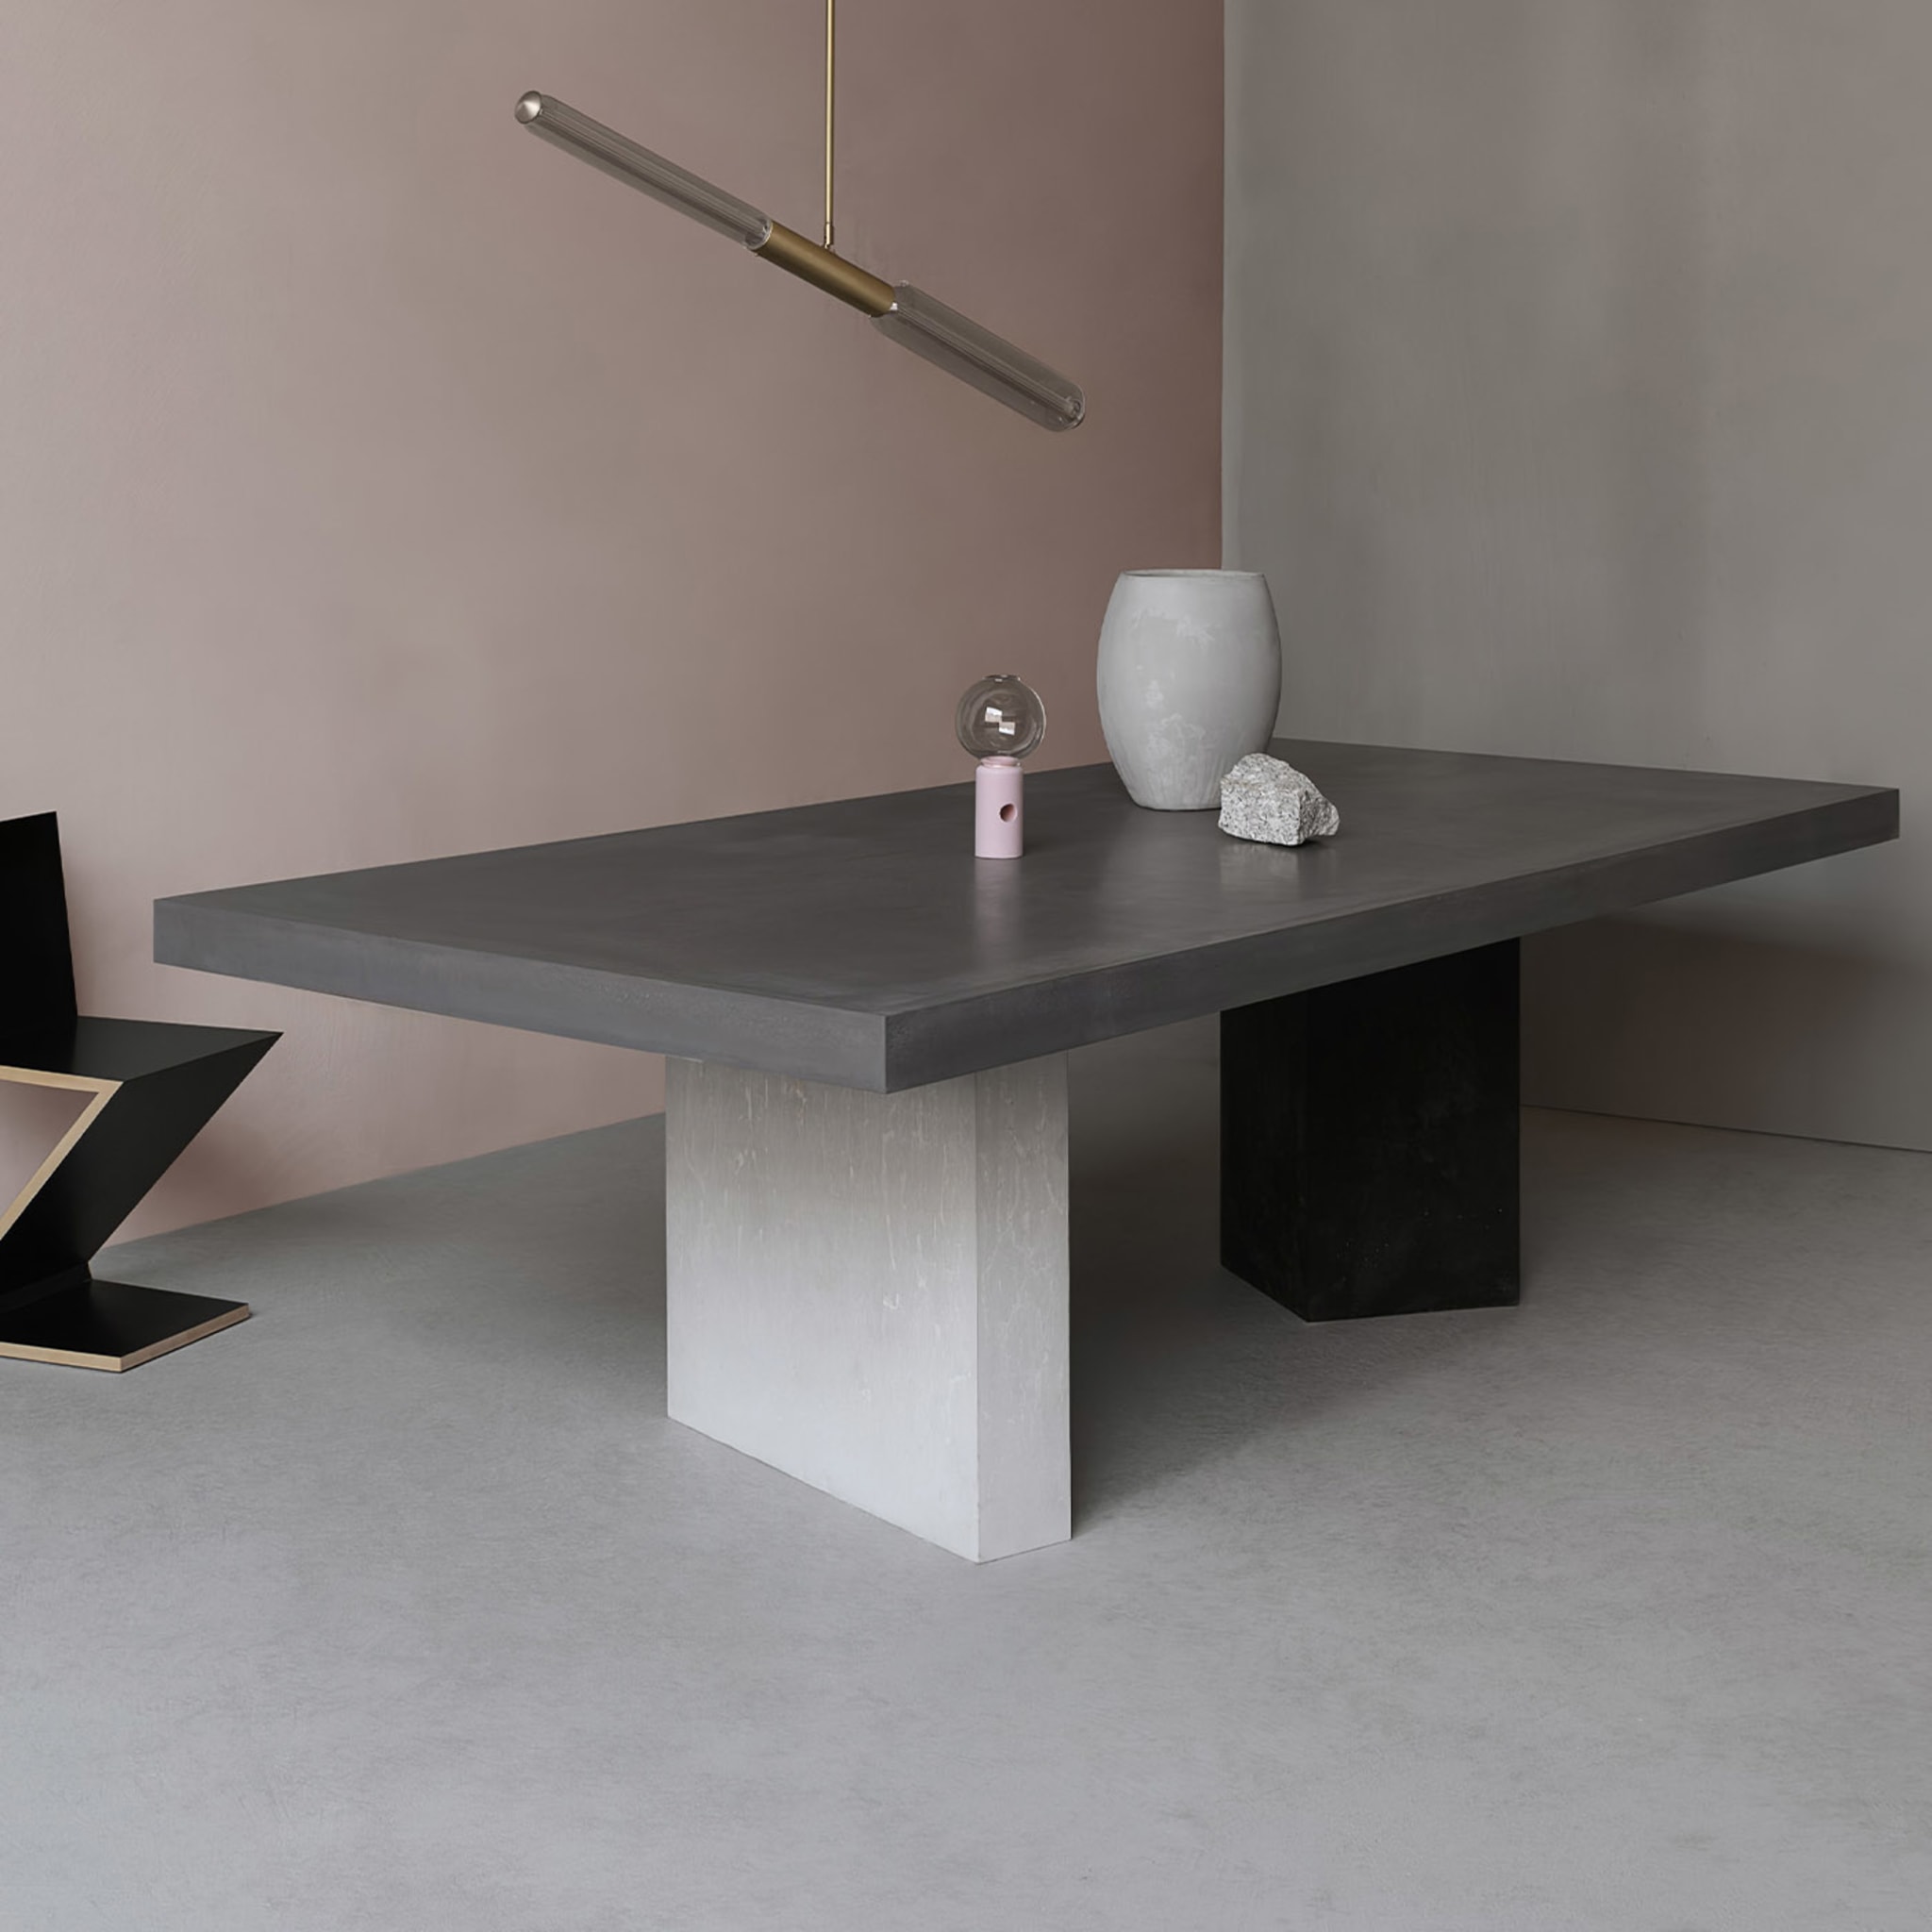 Euclide Dining Table - Alternative view 2